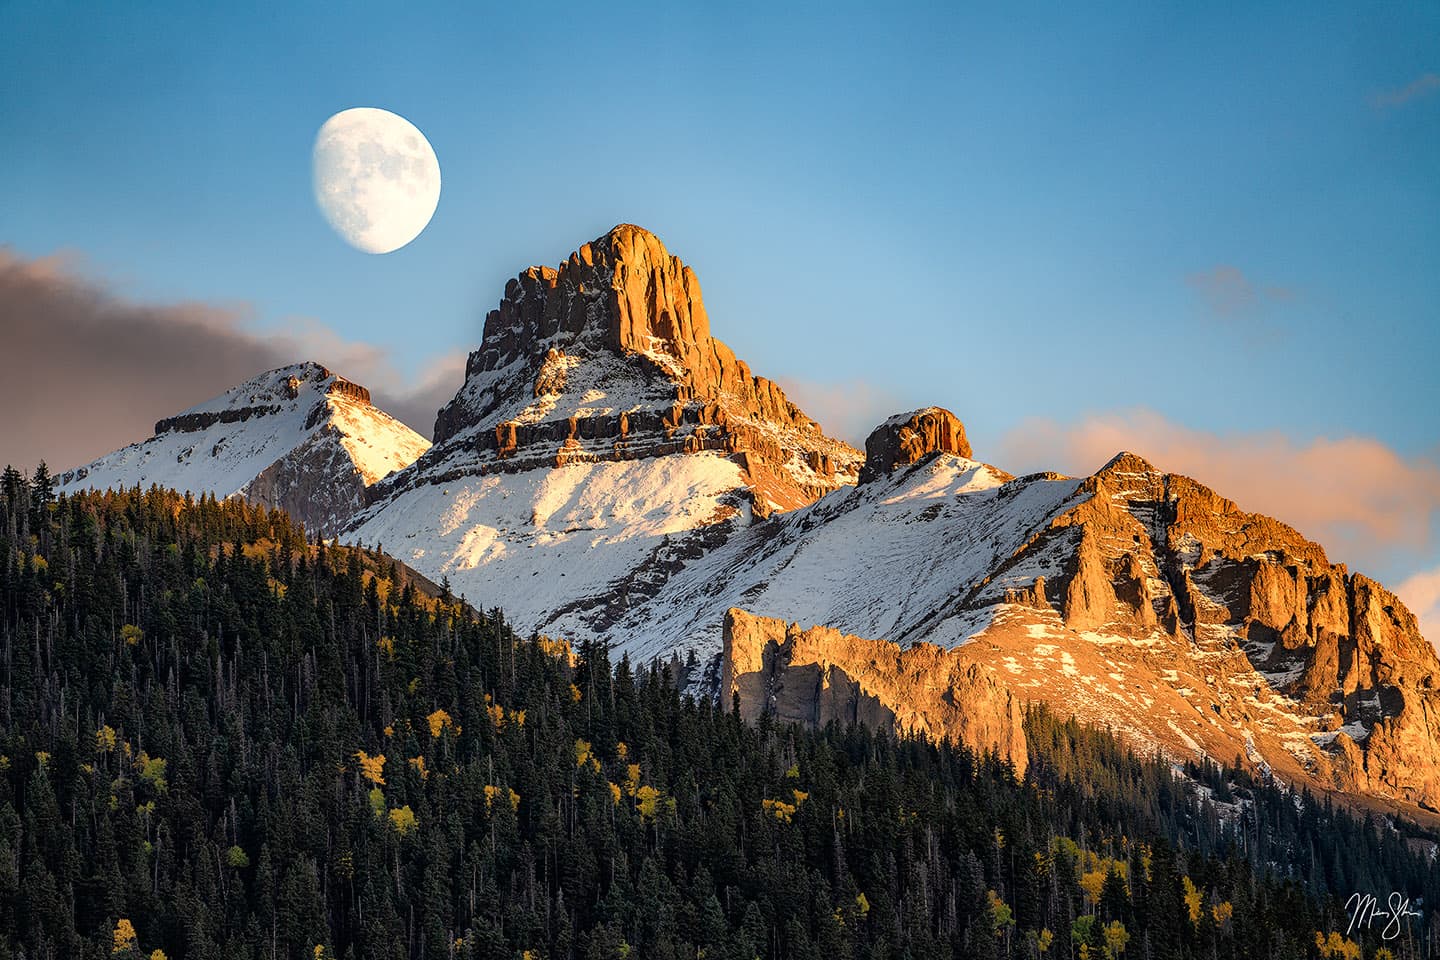 A nearly full moon rises above the jagged peaks just east of Mt Sneffels near Ridgway, Colorado.